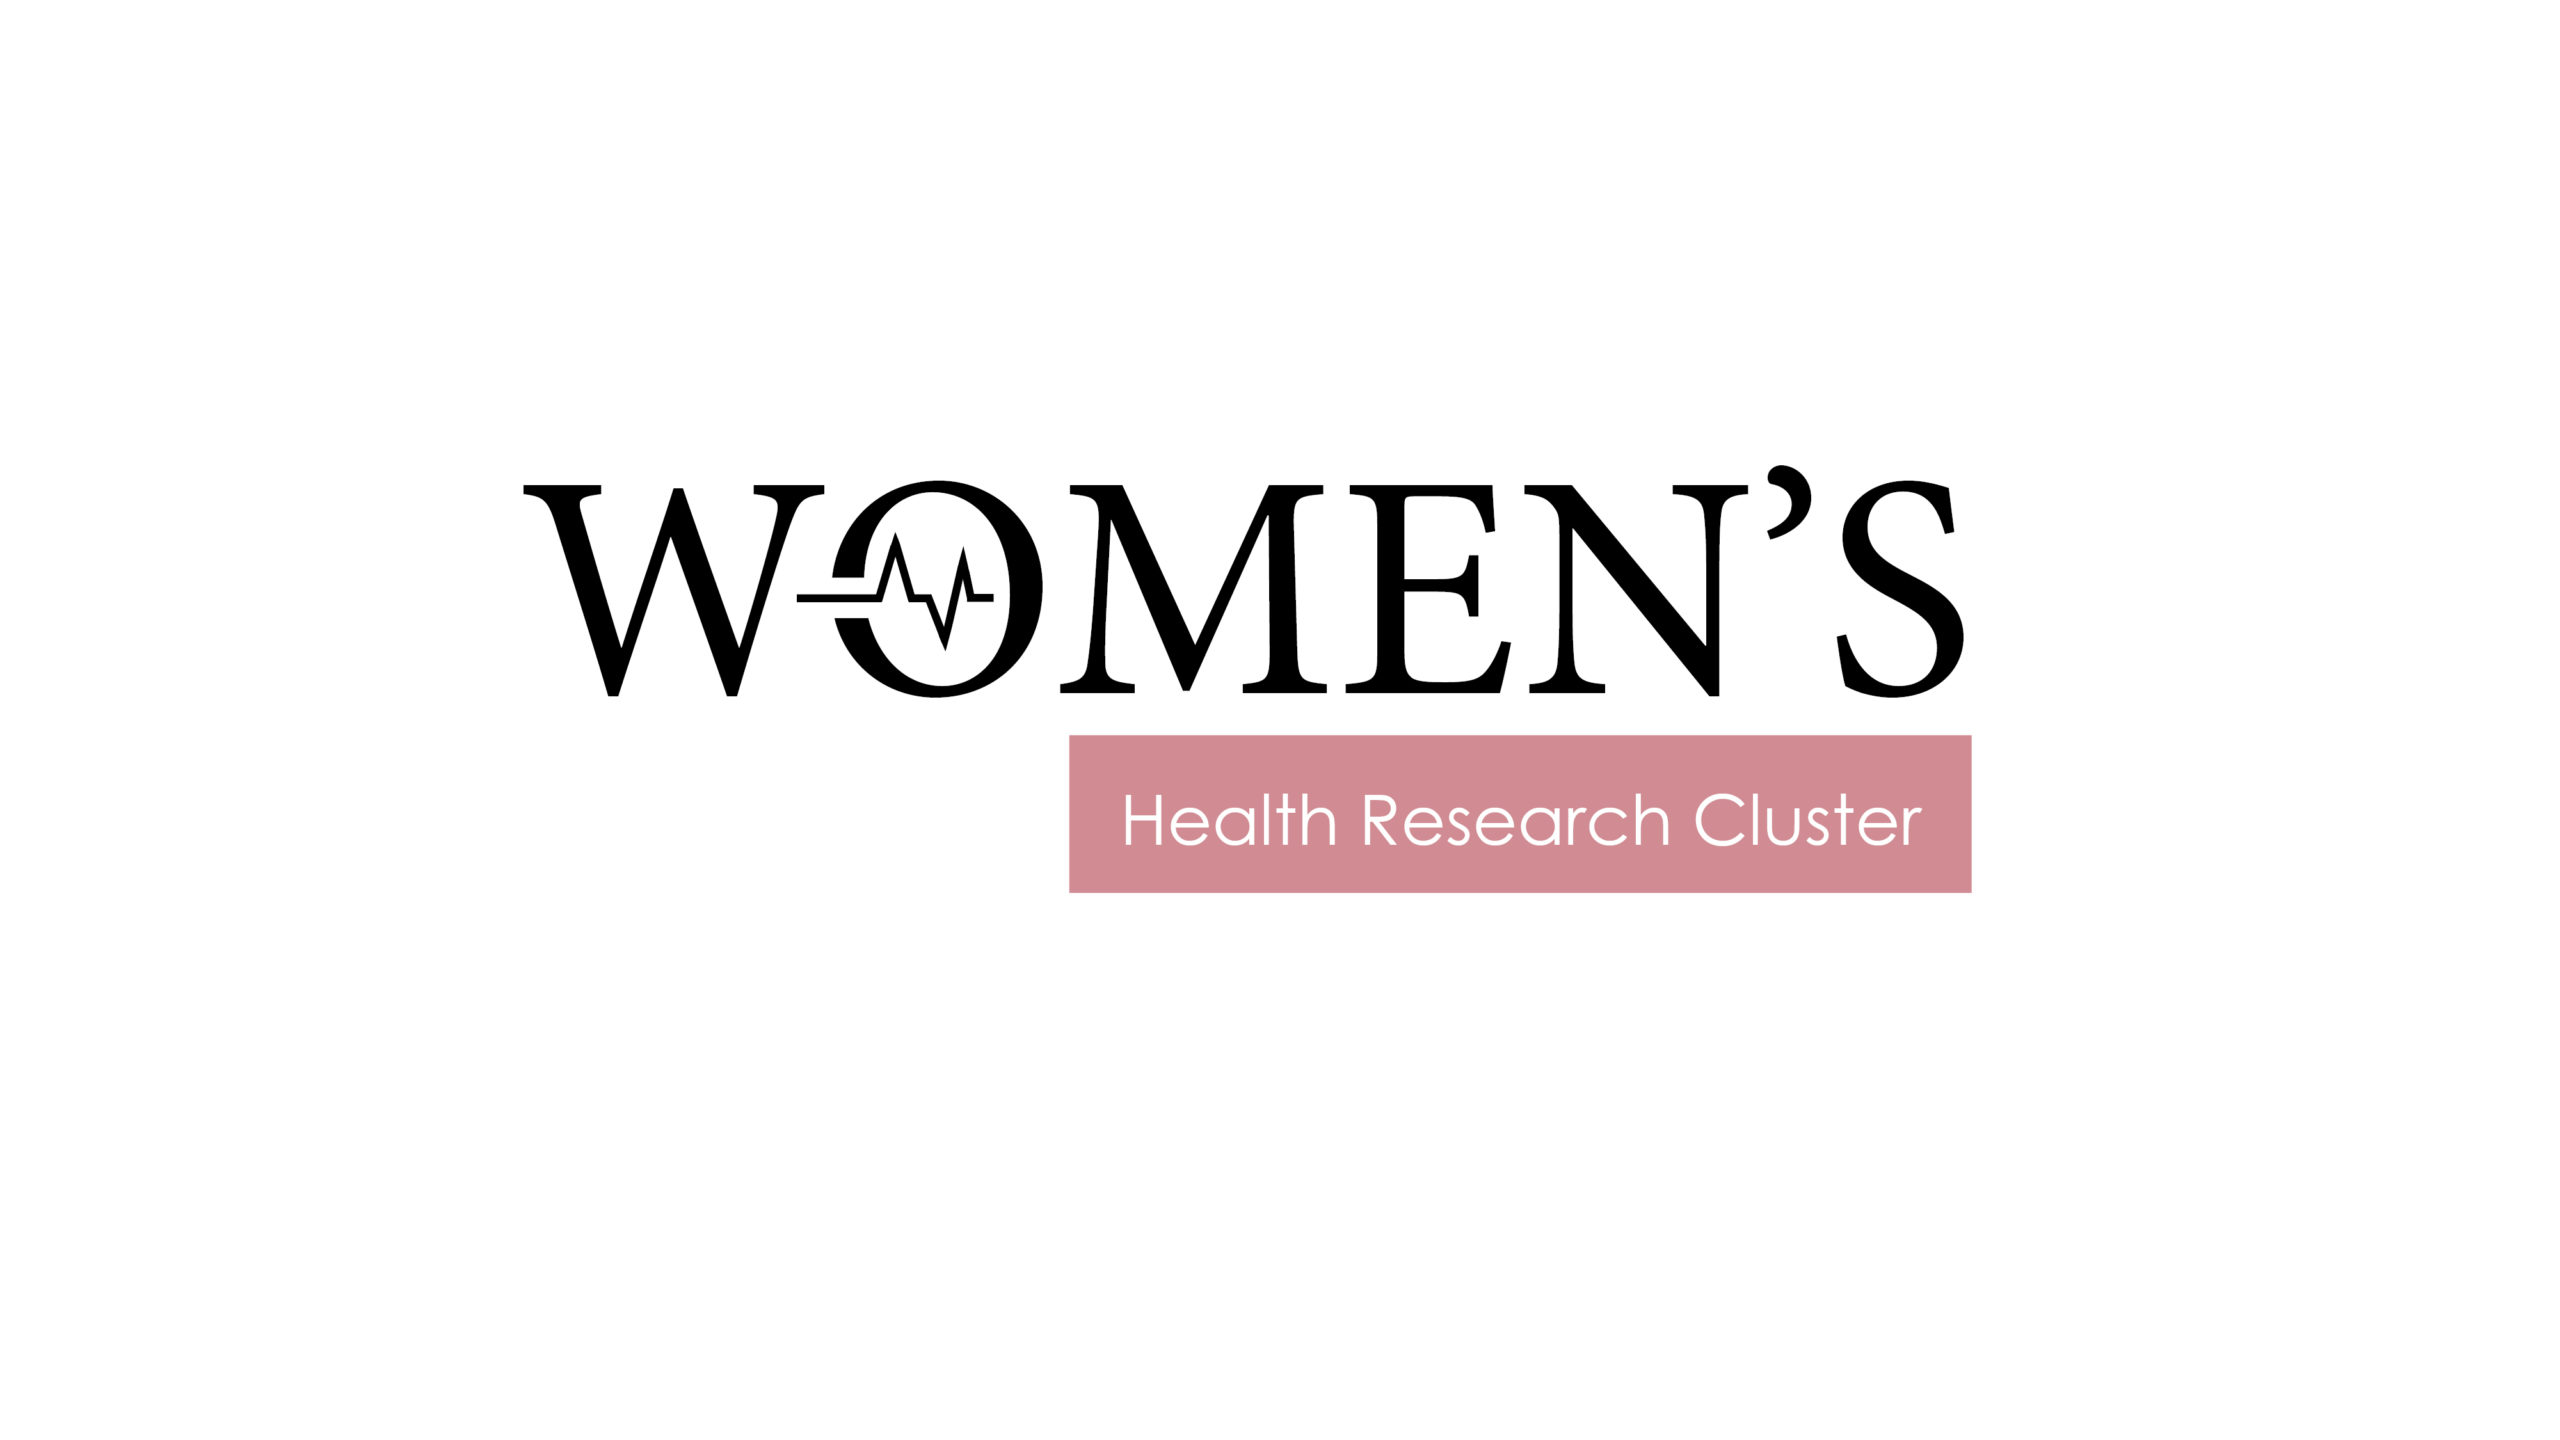 Women's health research cluster